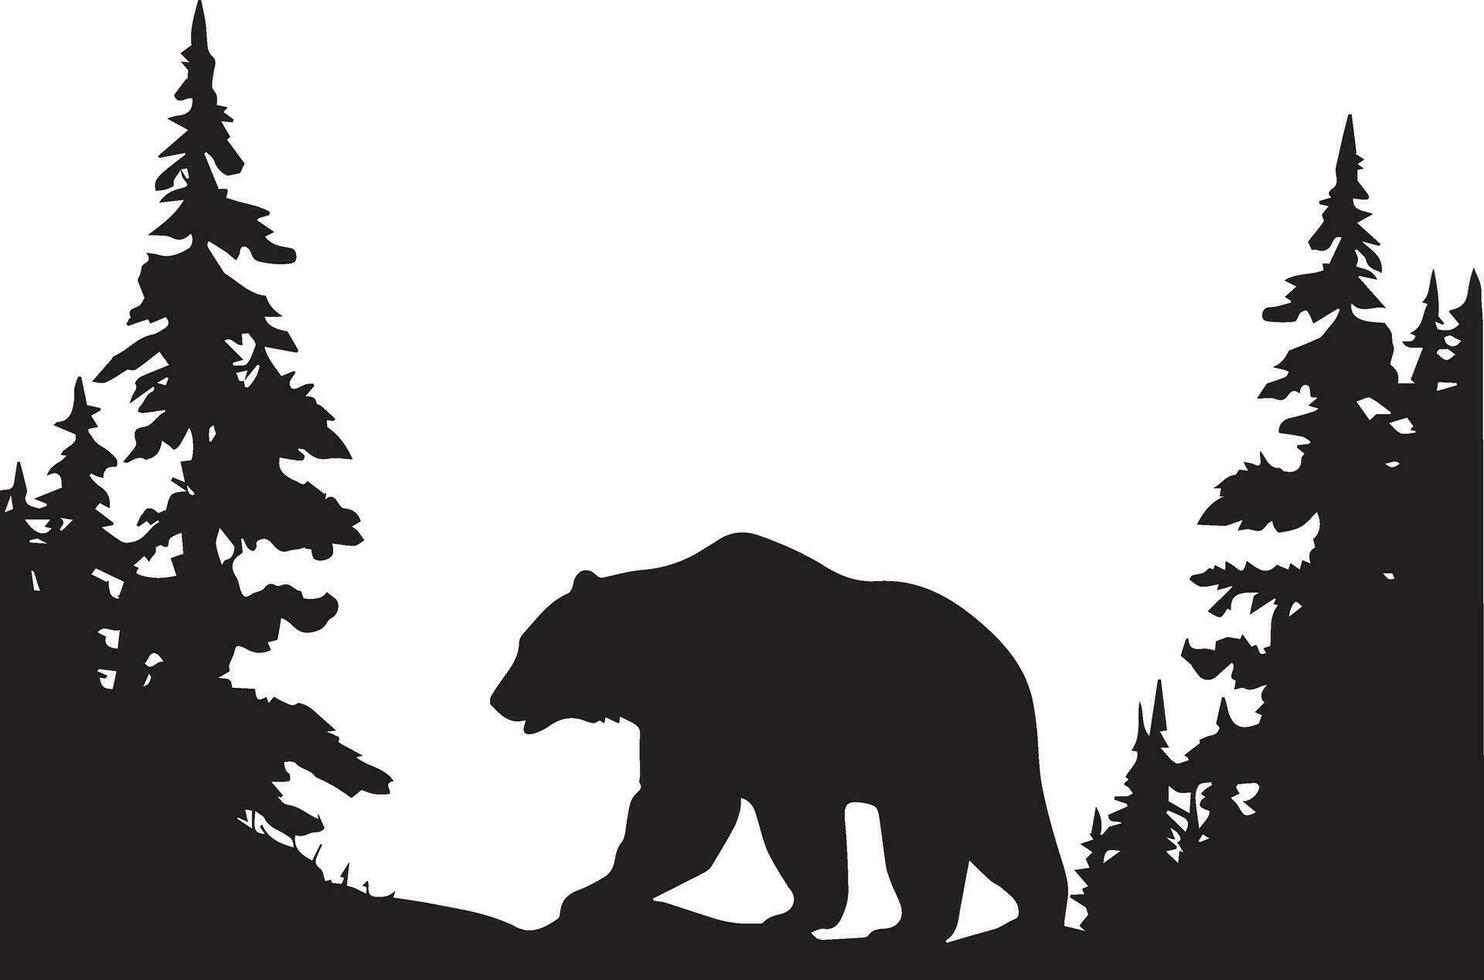 Bear On the forest vector silhouette illustration black color 8